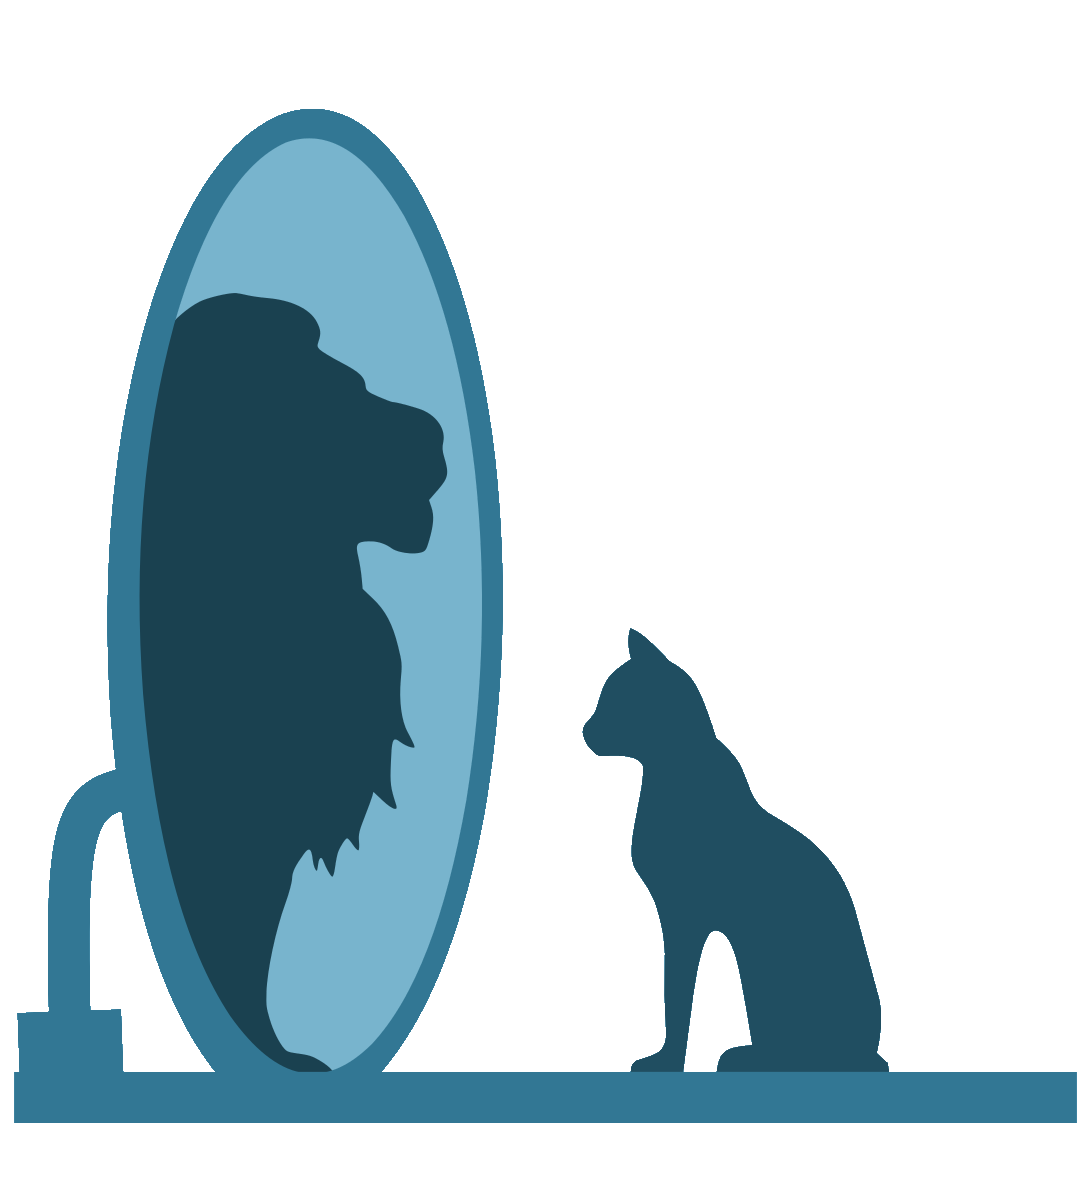 Image of cat seeing a lion in the mirror representing Sam Palmisano's ego holding IBM's Centennial in 2011 instead of 2014.